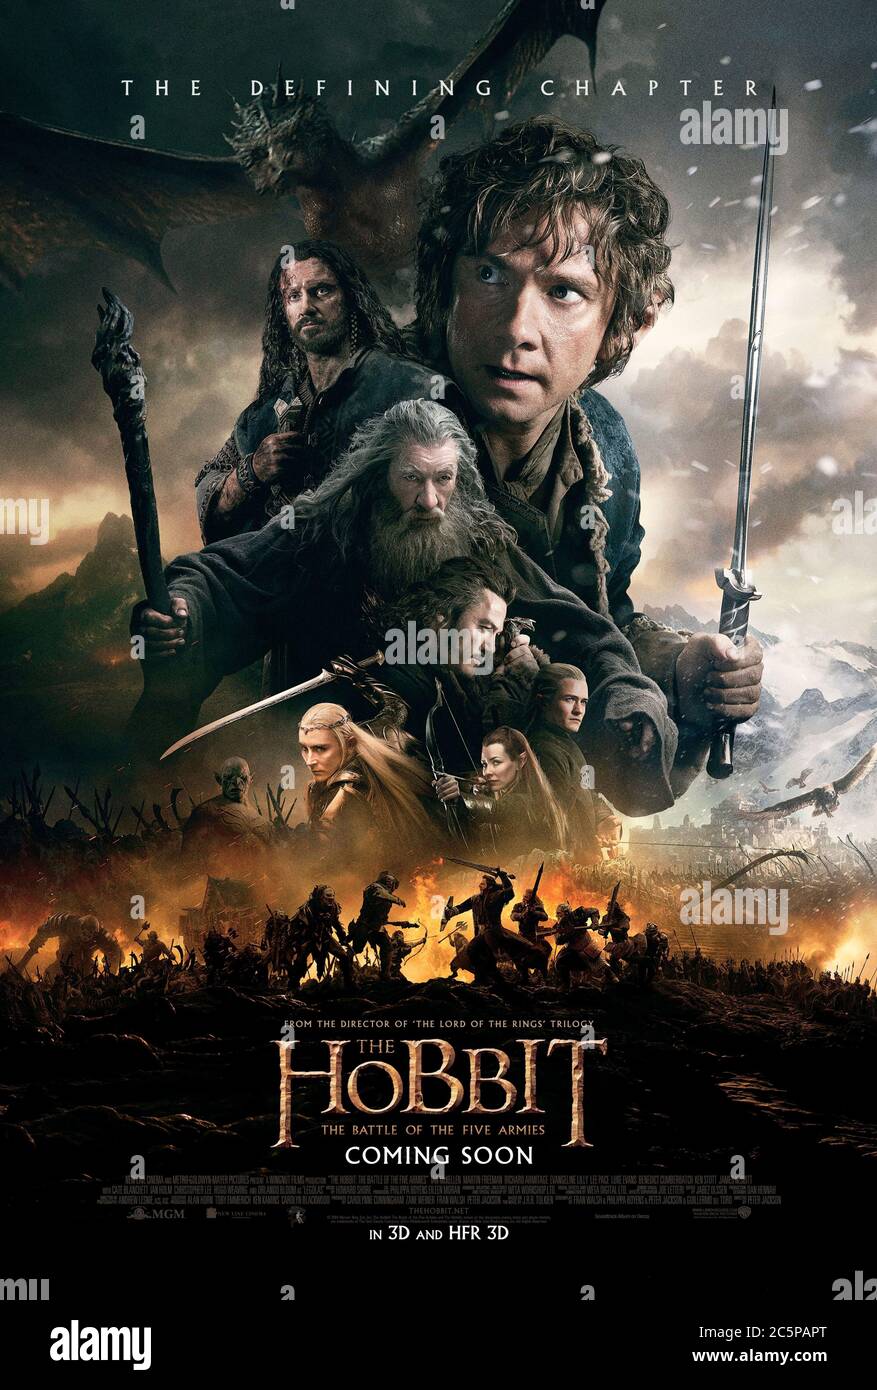 The Hobbit: The Battle of the Five Armies (2014) directed by Peter Jackson and starring Ian McKellen, Martin Freeman, Richard Armitage and James Nesbitt. Final part of the trilogy based on J. R. R. Tolkien's book The Hobbit, Bilbo Baggins fight to keep the Lonely Mountain from falling into the hands of the mysterious Necromancer. US advance poster ***EDITORIAL USE ONLY***. Credit: BFA / Warner Bros Stock Photo